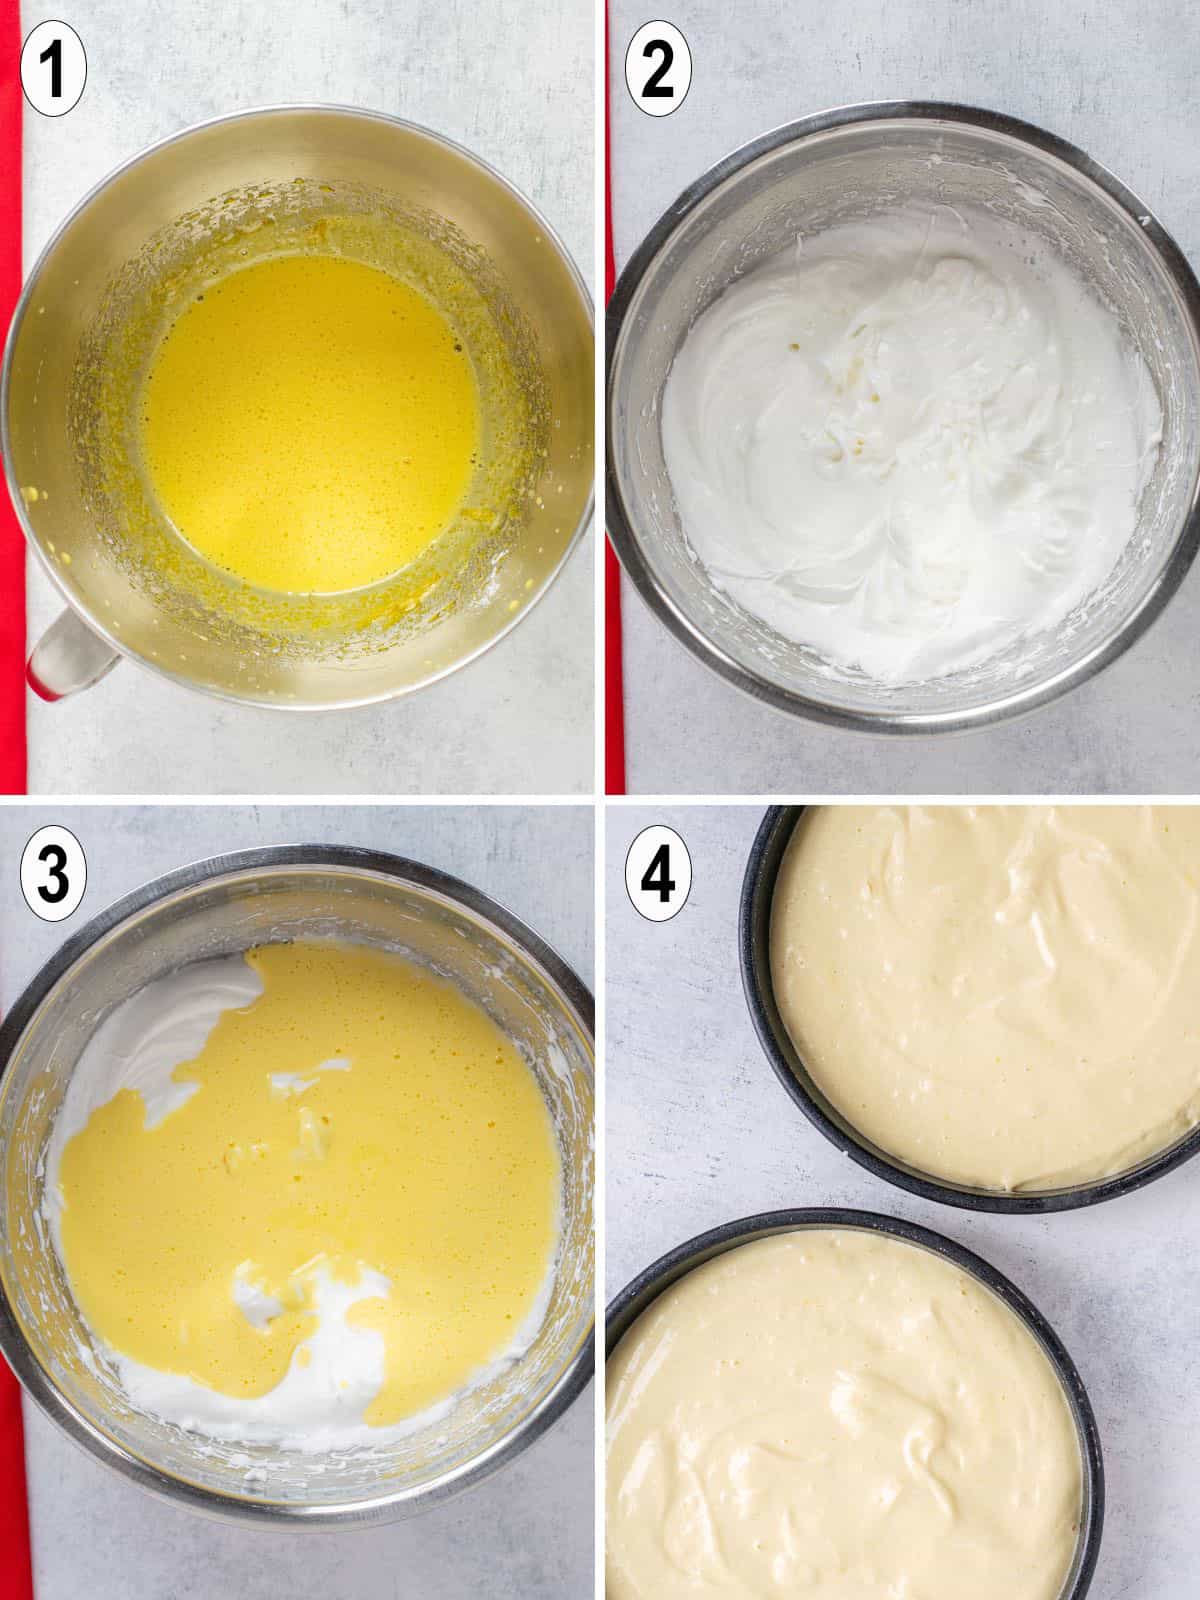 cake batter made in bowl and poured into cake pans